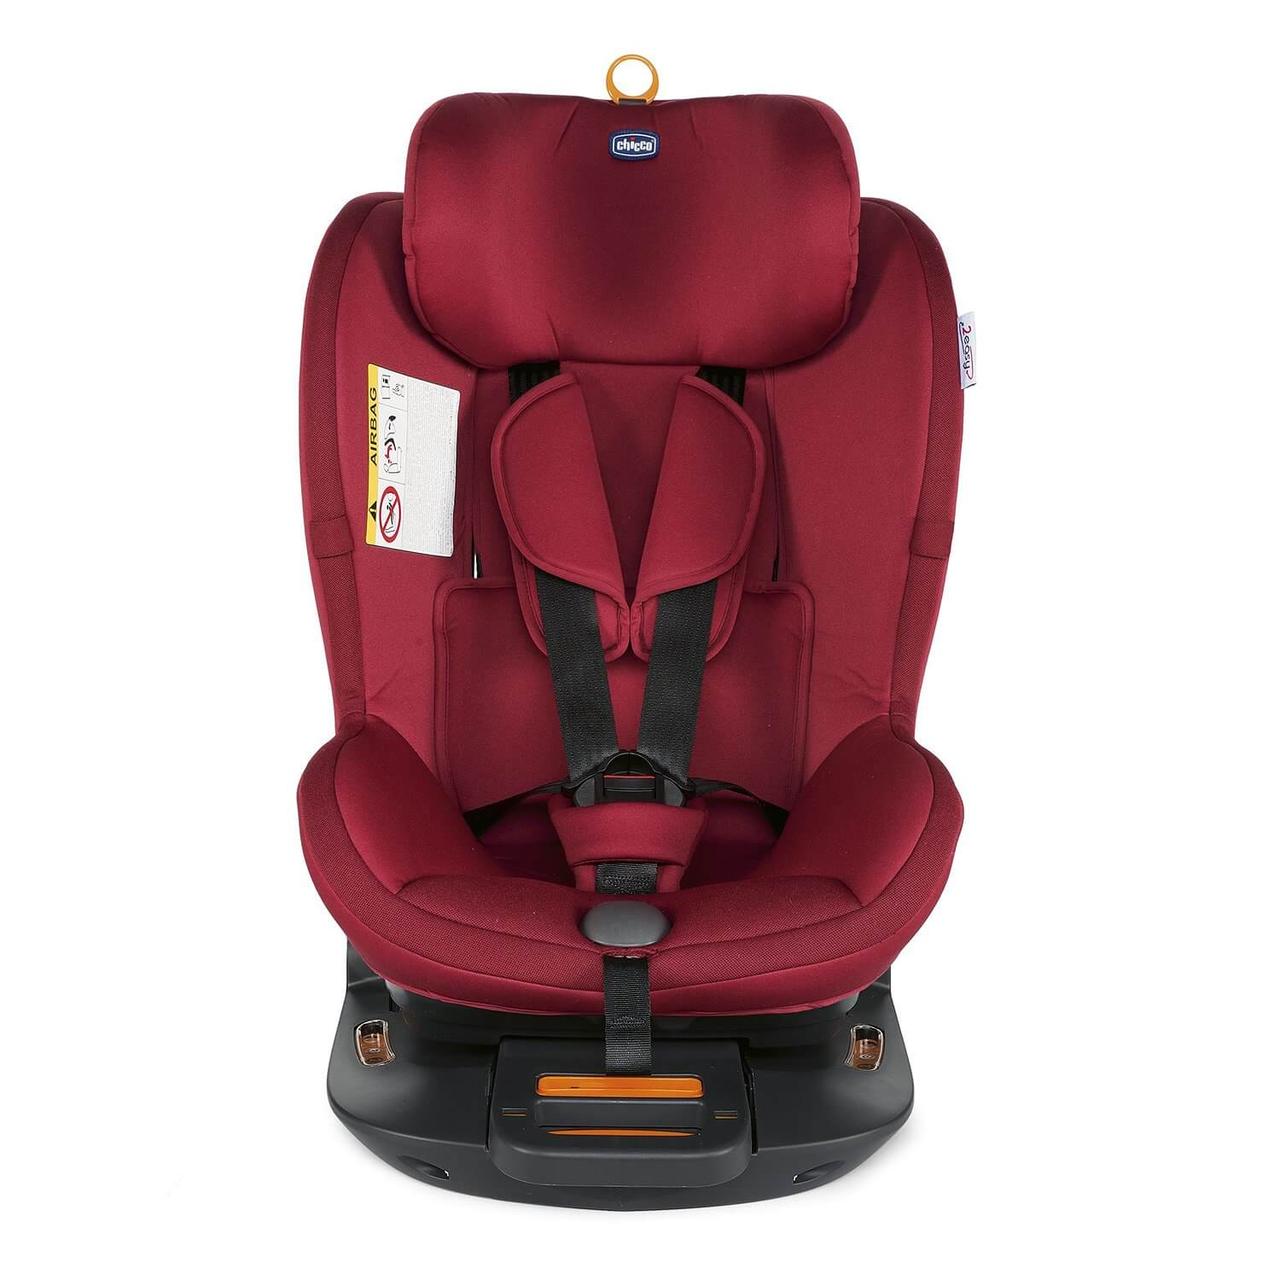 Chicco: Автокресло 2EASY Red Passion (018 kg) 0+